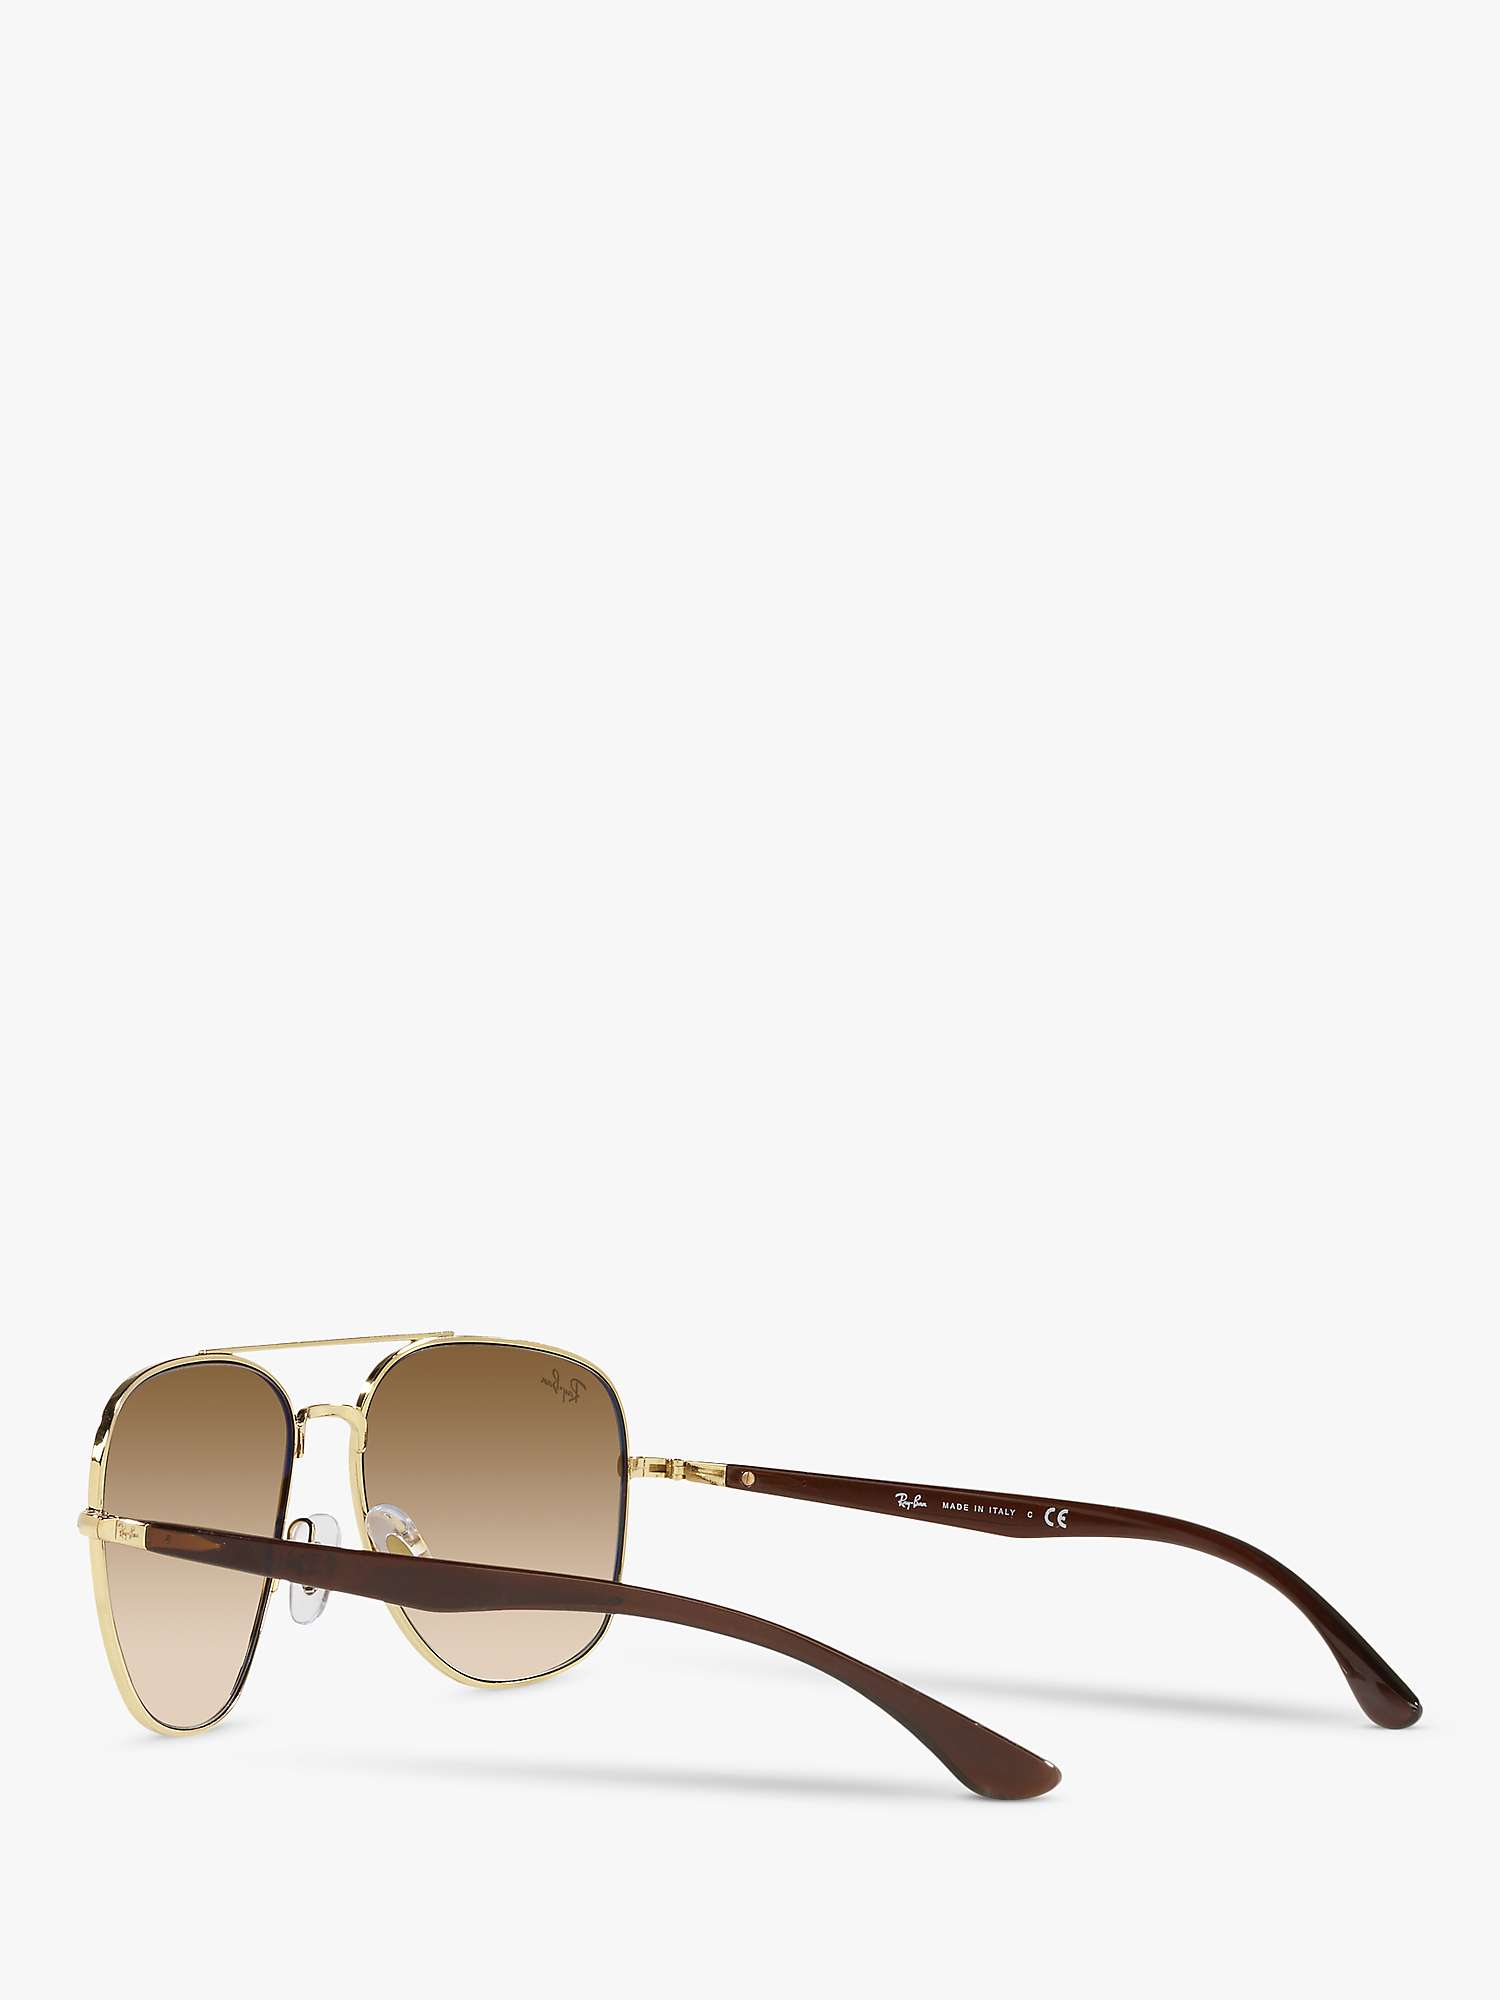 Buy Ray-Ban RB3683 Unisex Square Sunglasses Online at johnlewis.com